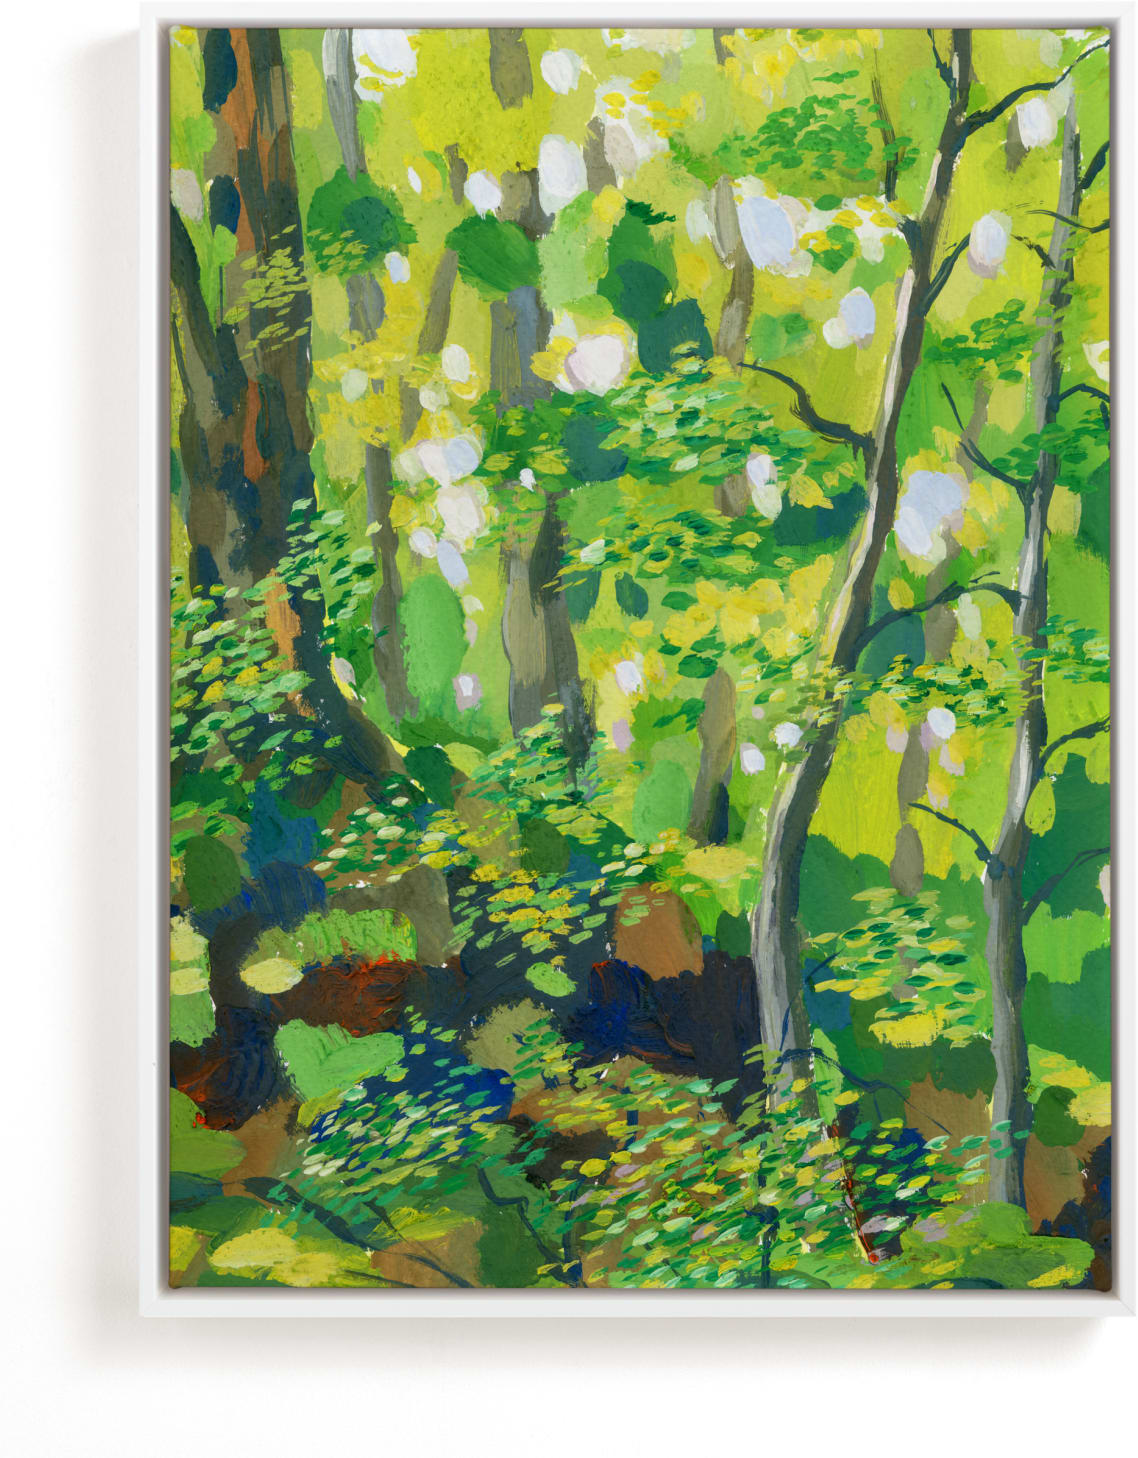 This is a colorful art by Alexandra Dzh called Green forest.